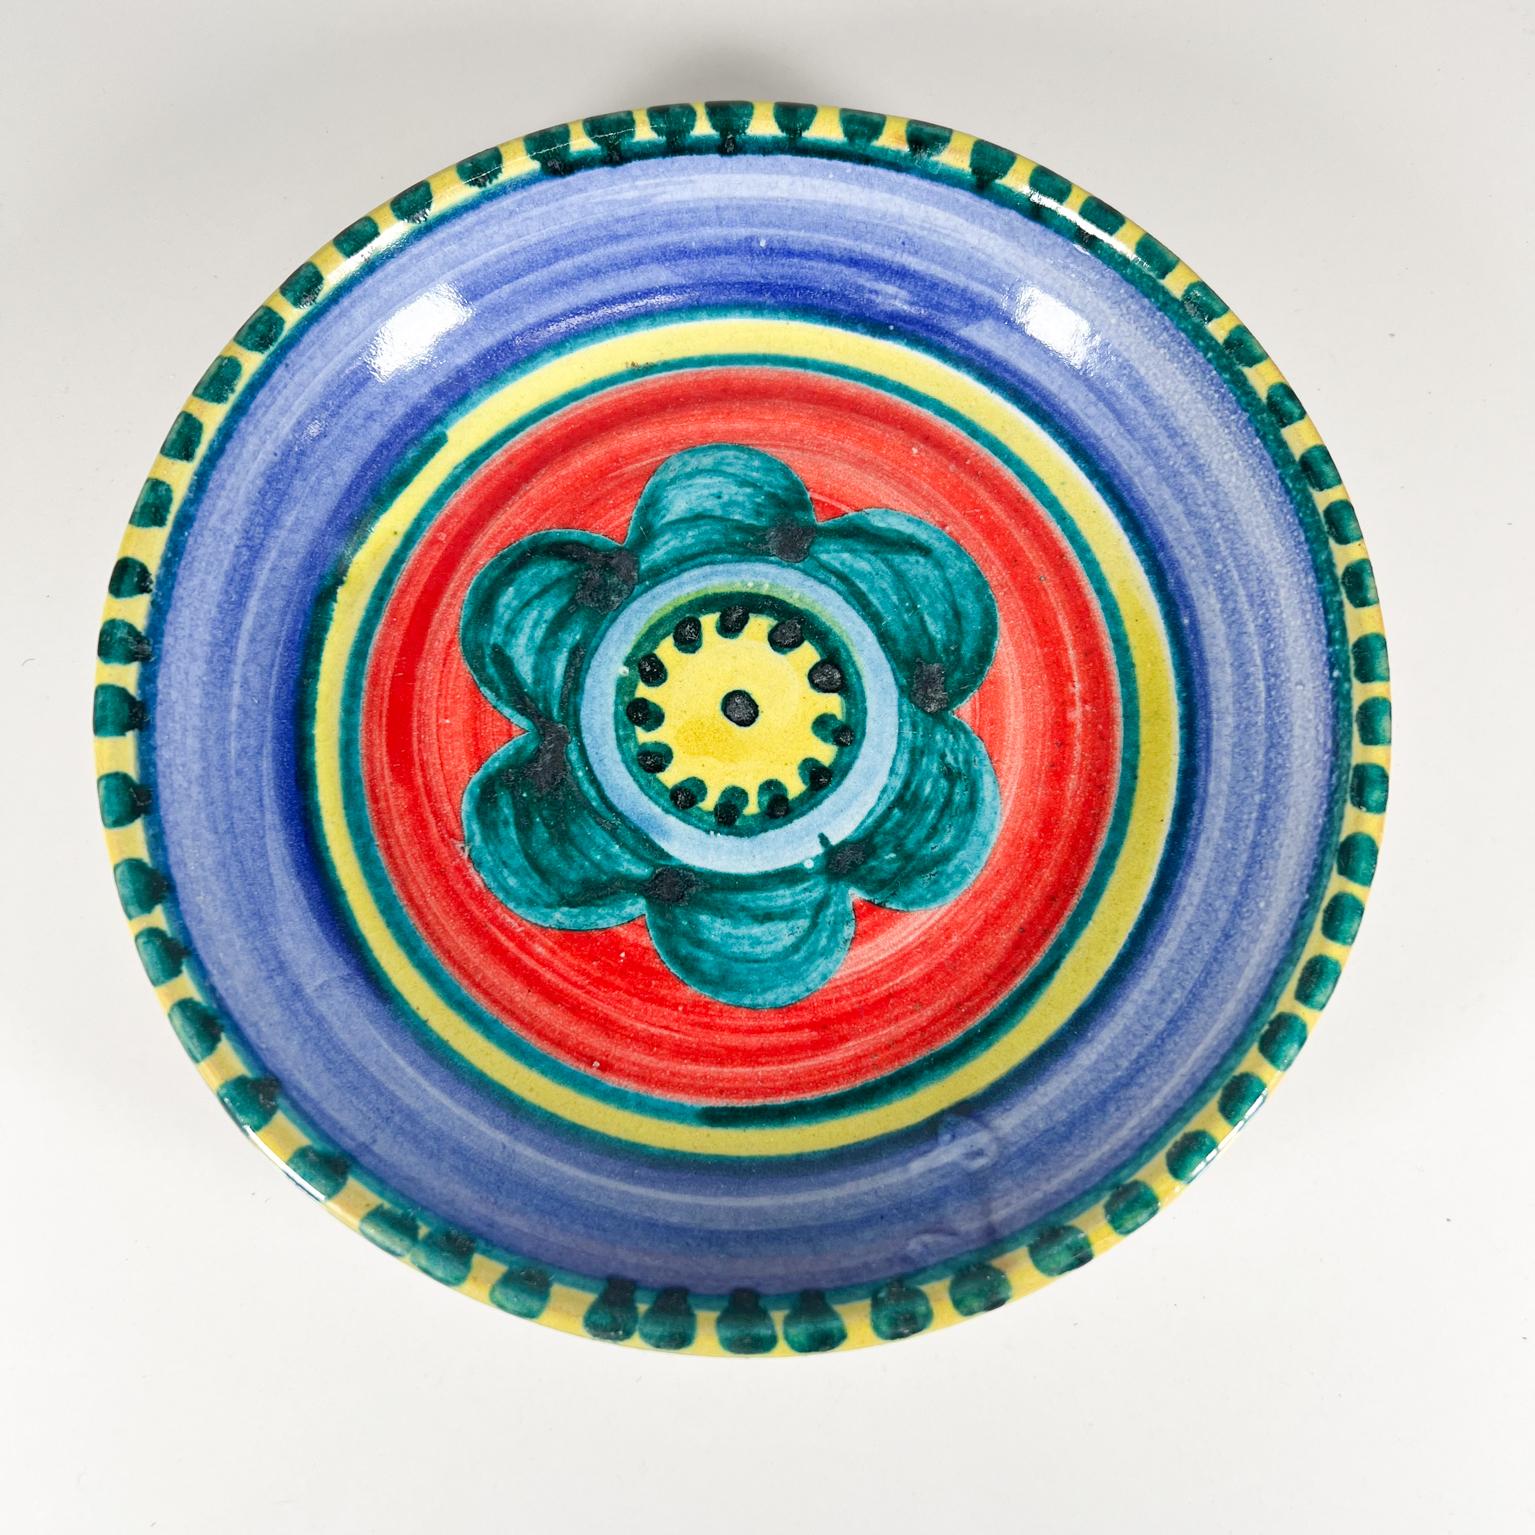 1960s DeSimone pottery of Italy colorful ceramic Art hand painted soup bowl plate 
Giovanni Desimone Italy
Measures: 8.5 diameter x 1.63 tall 
Inscription: DESIMONE
Original vintage condition.
Refer to images.
We have more!